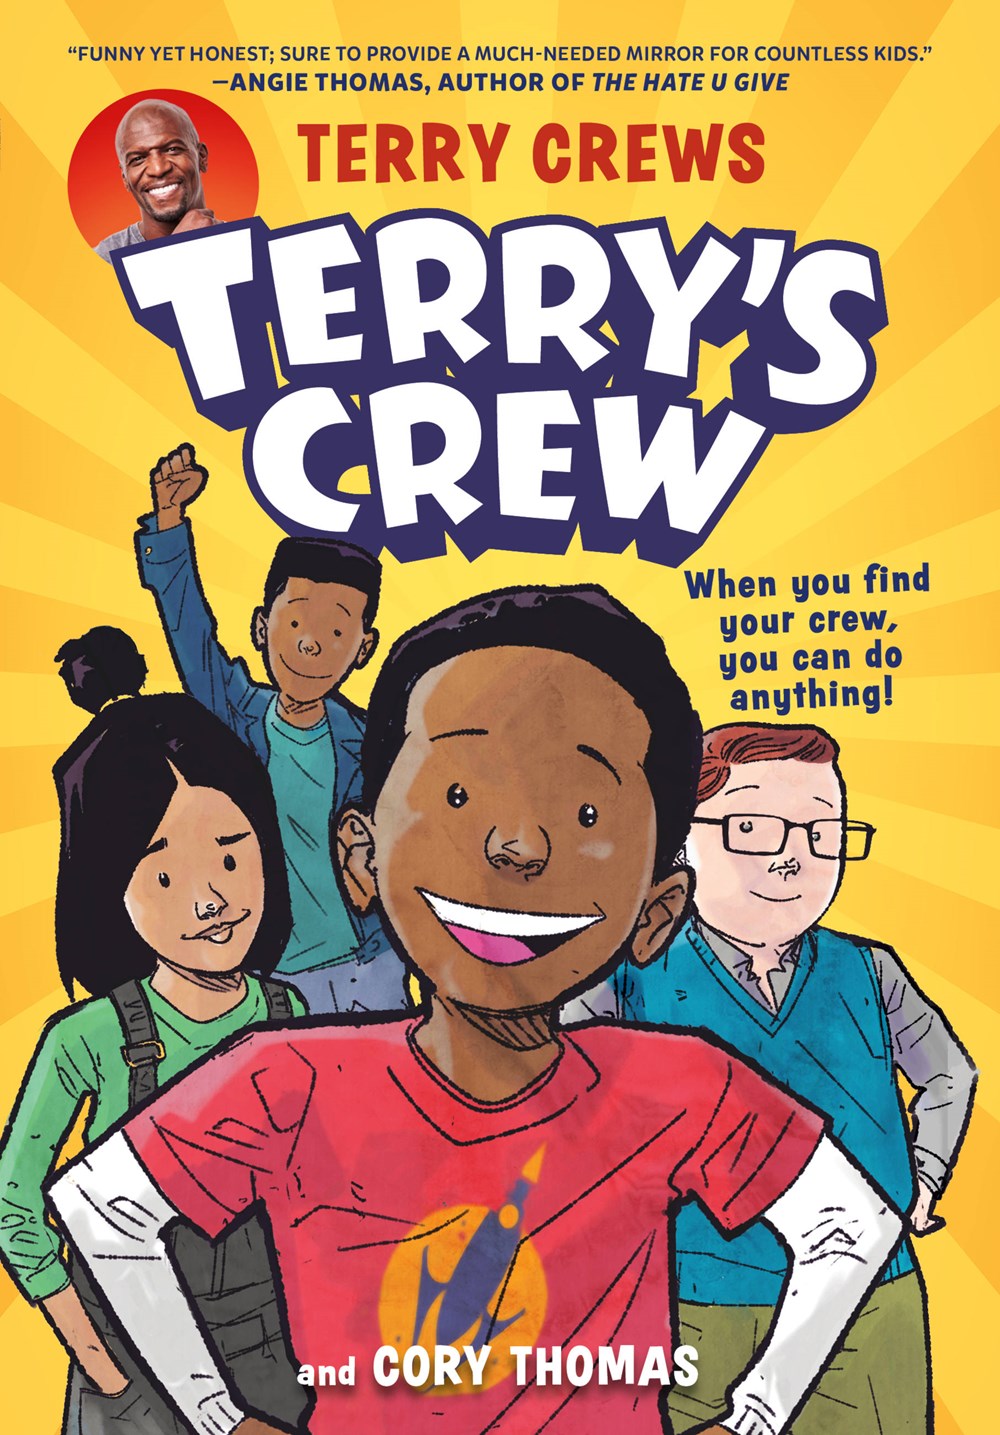 Terry's Crew by Terry Crews and Cory Thomas